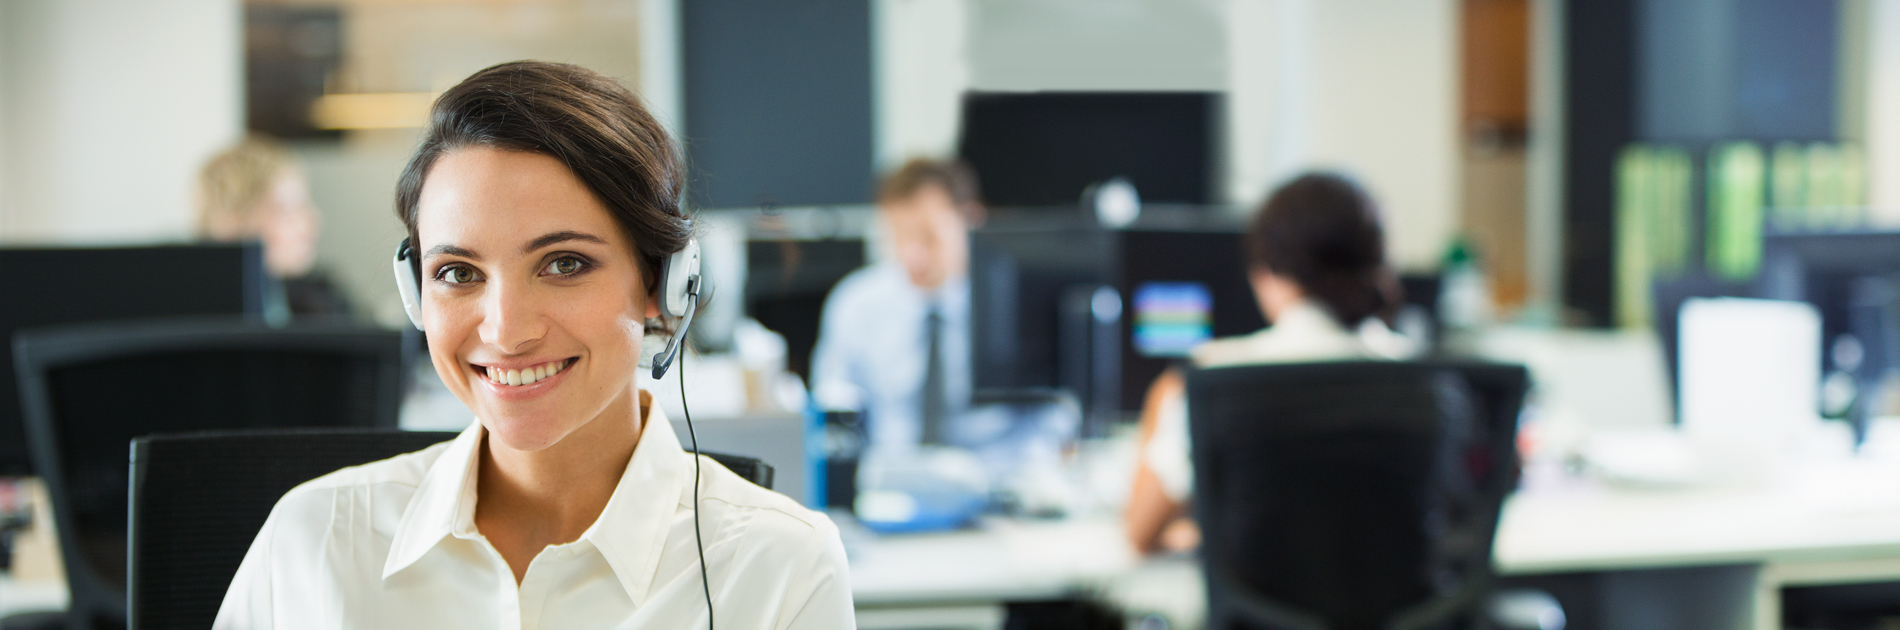 Female customer support representative smiling with a headset on with a blurred background office environment